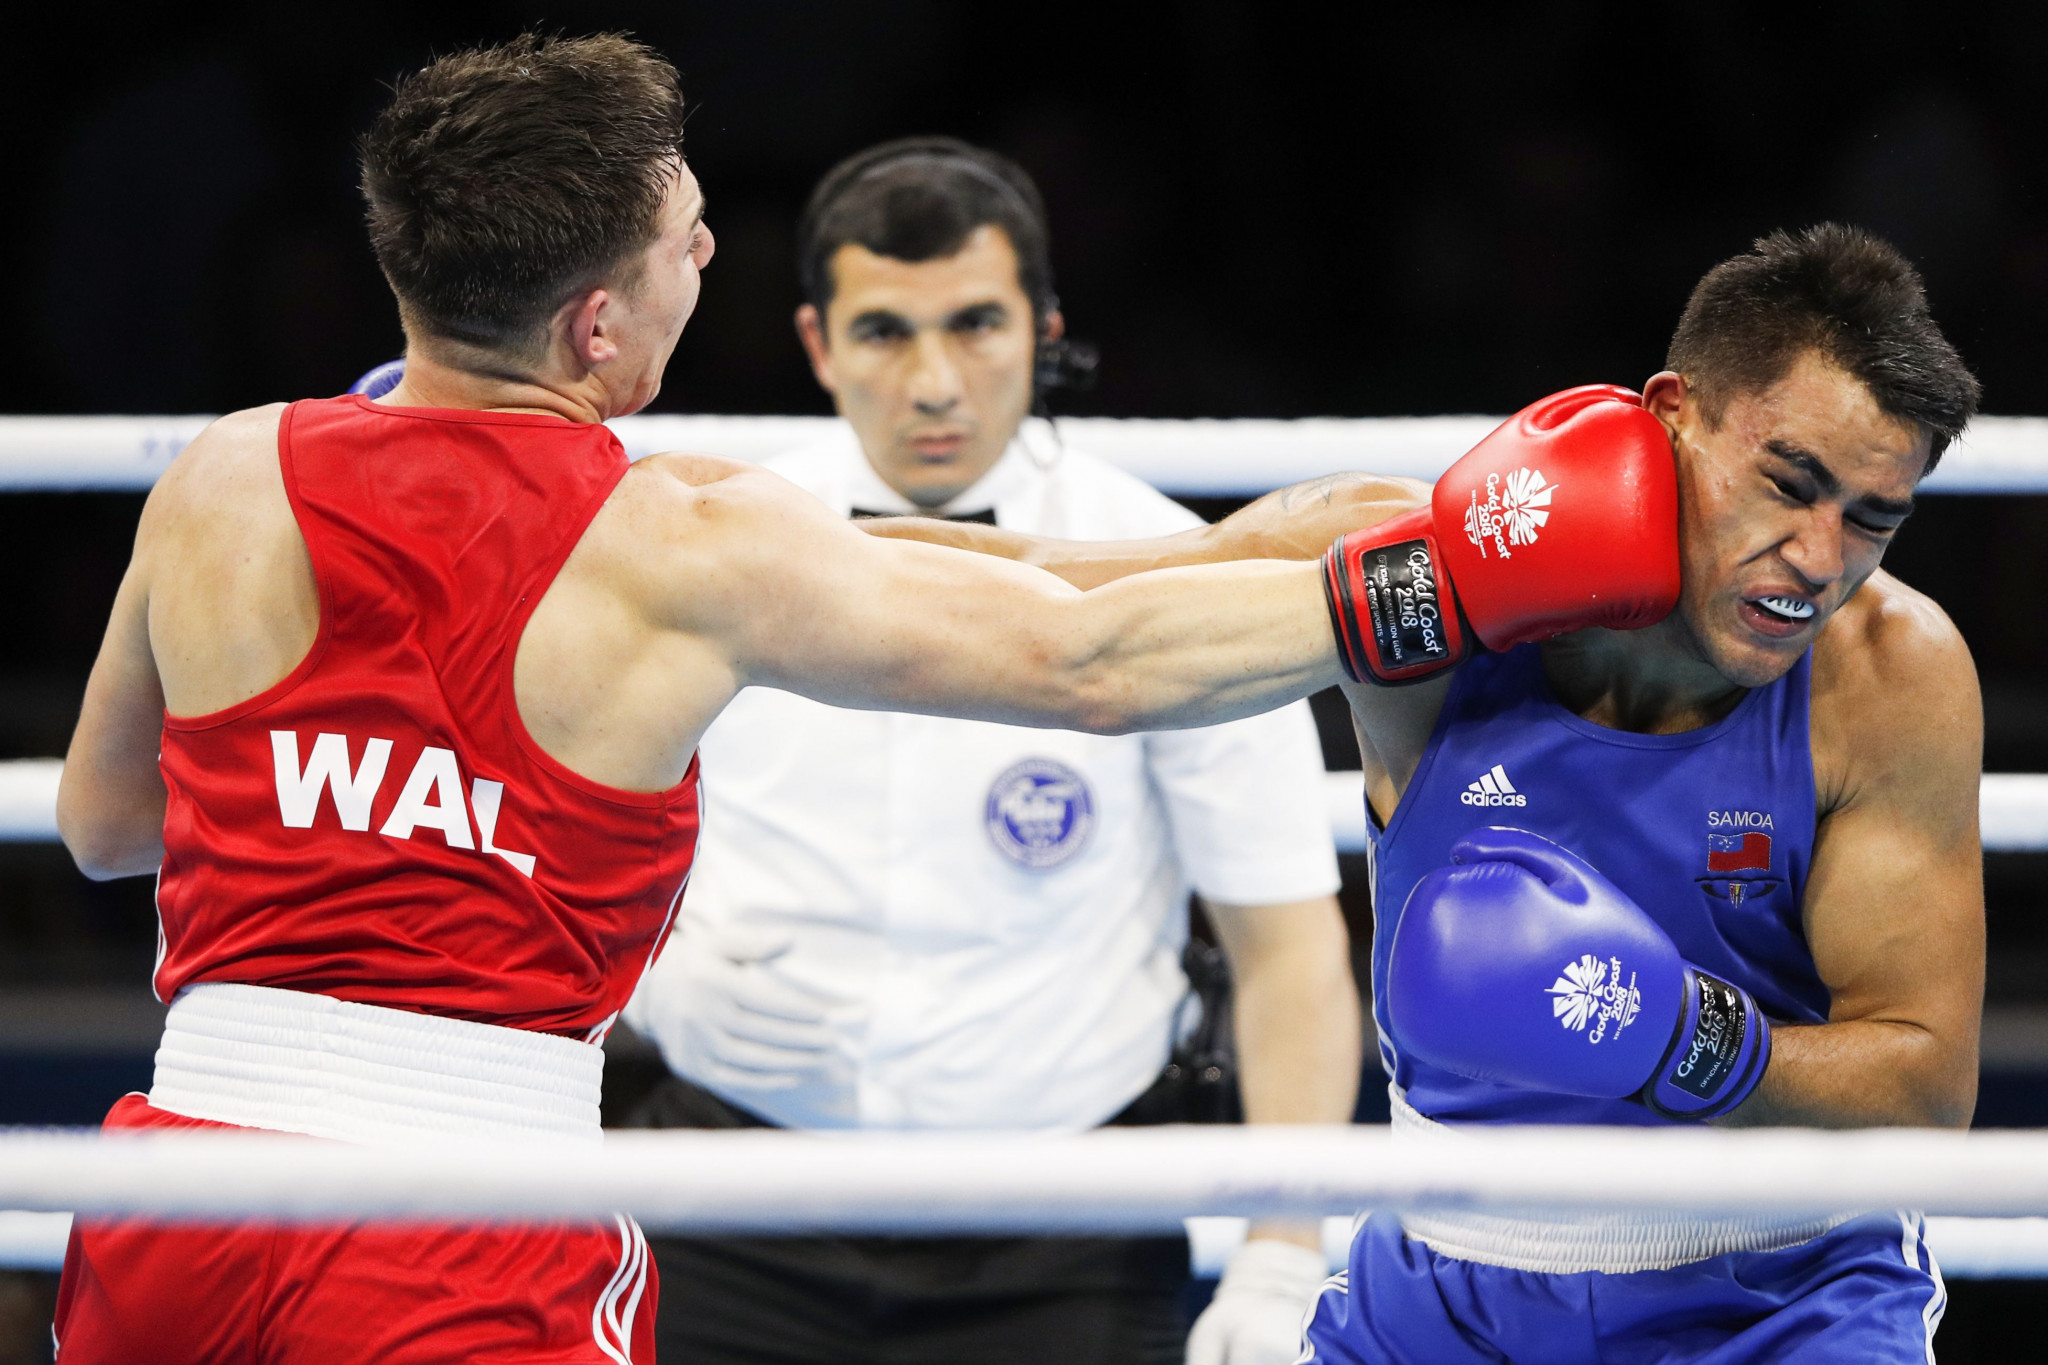 A special taskforce could be set up by the Commonwealth Games Federation to oversee the boxing tournament at Birmingham 2022 ©Getty Images